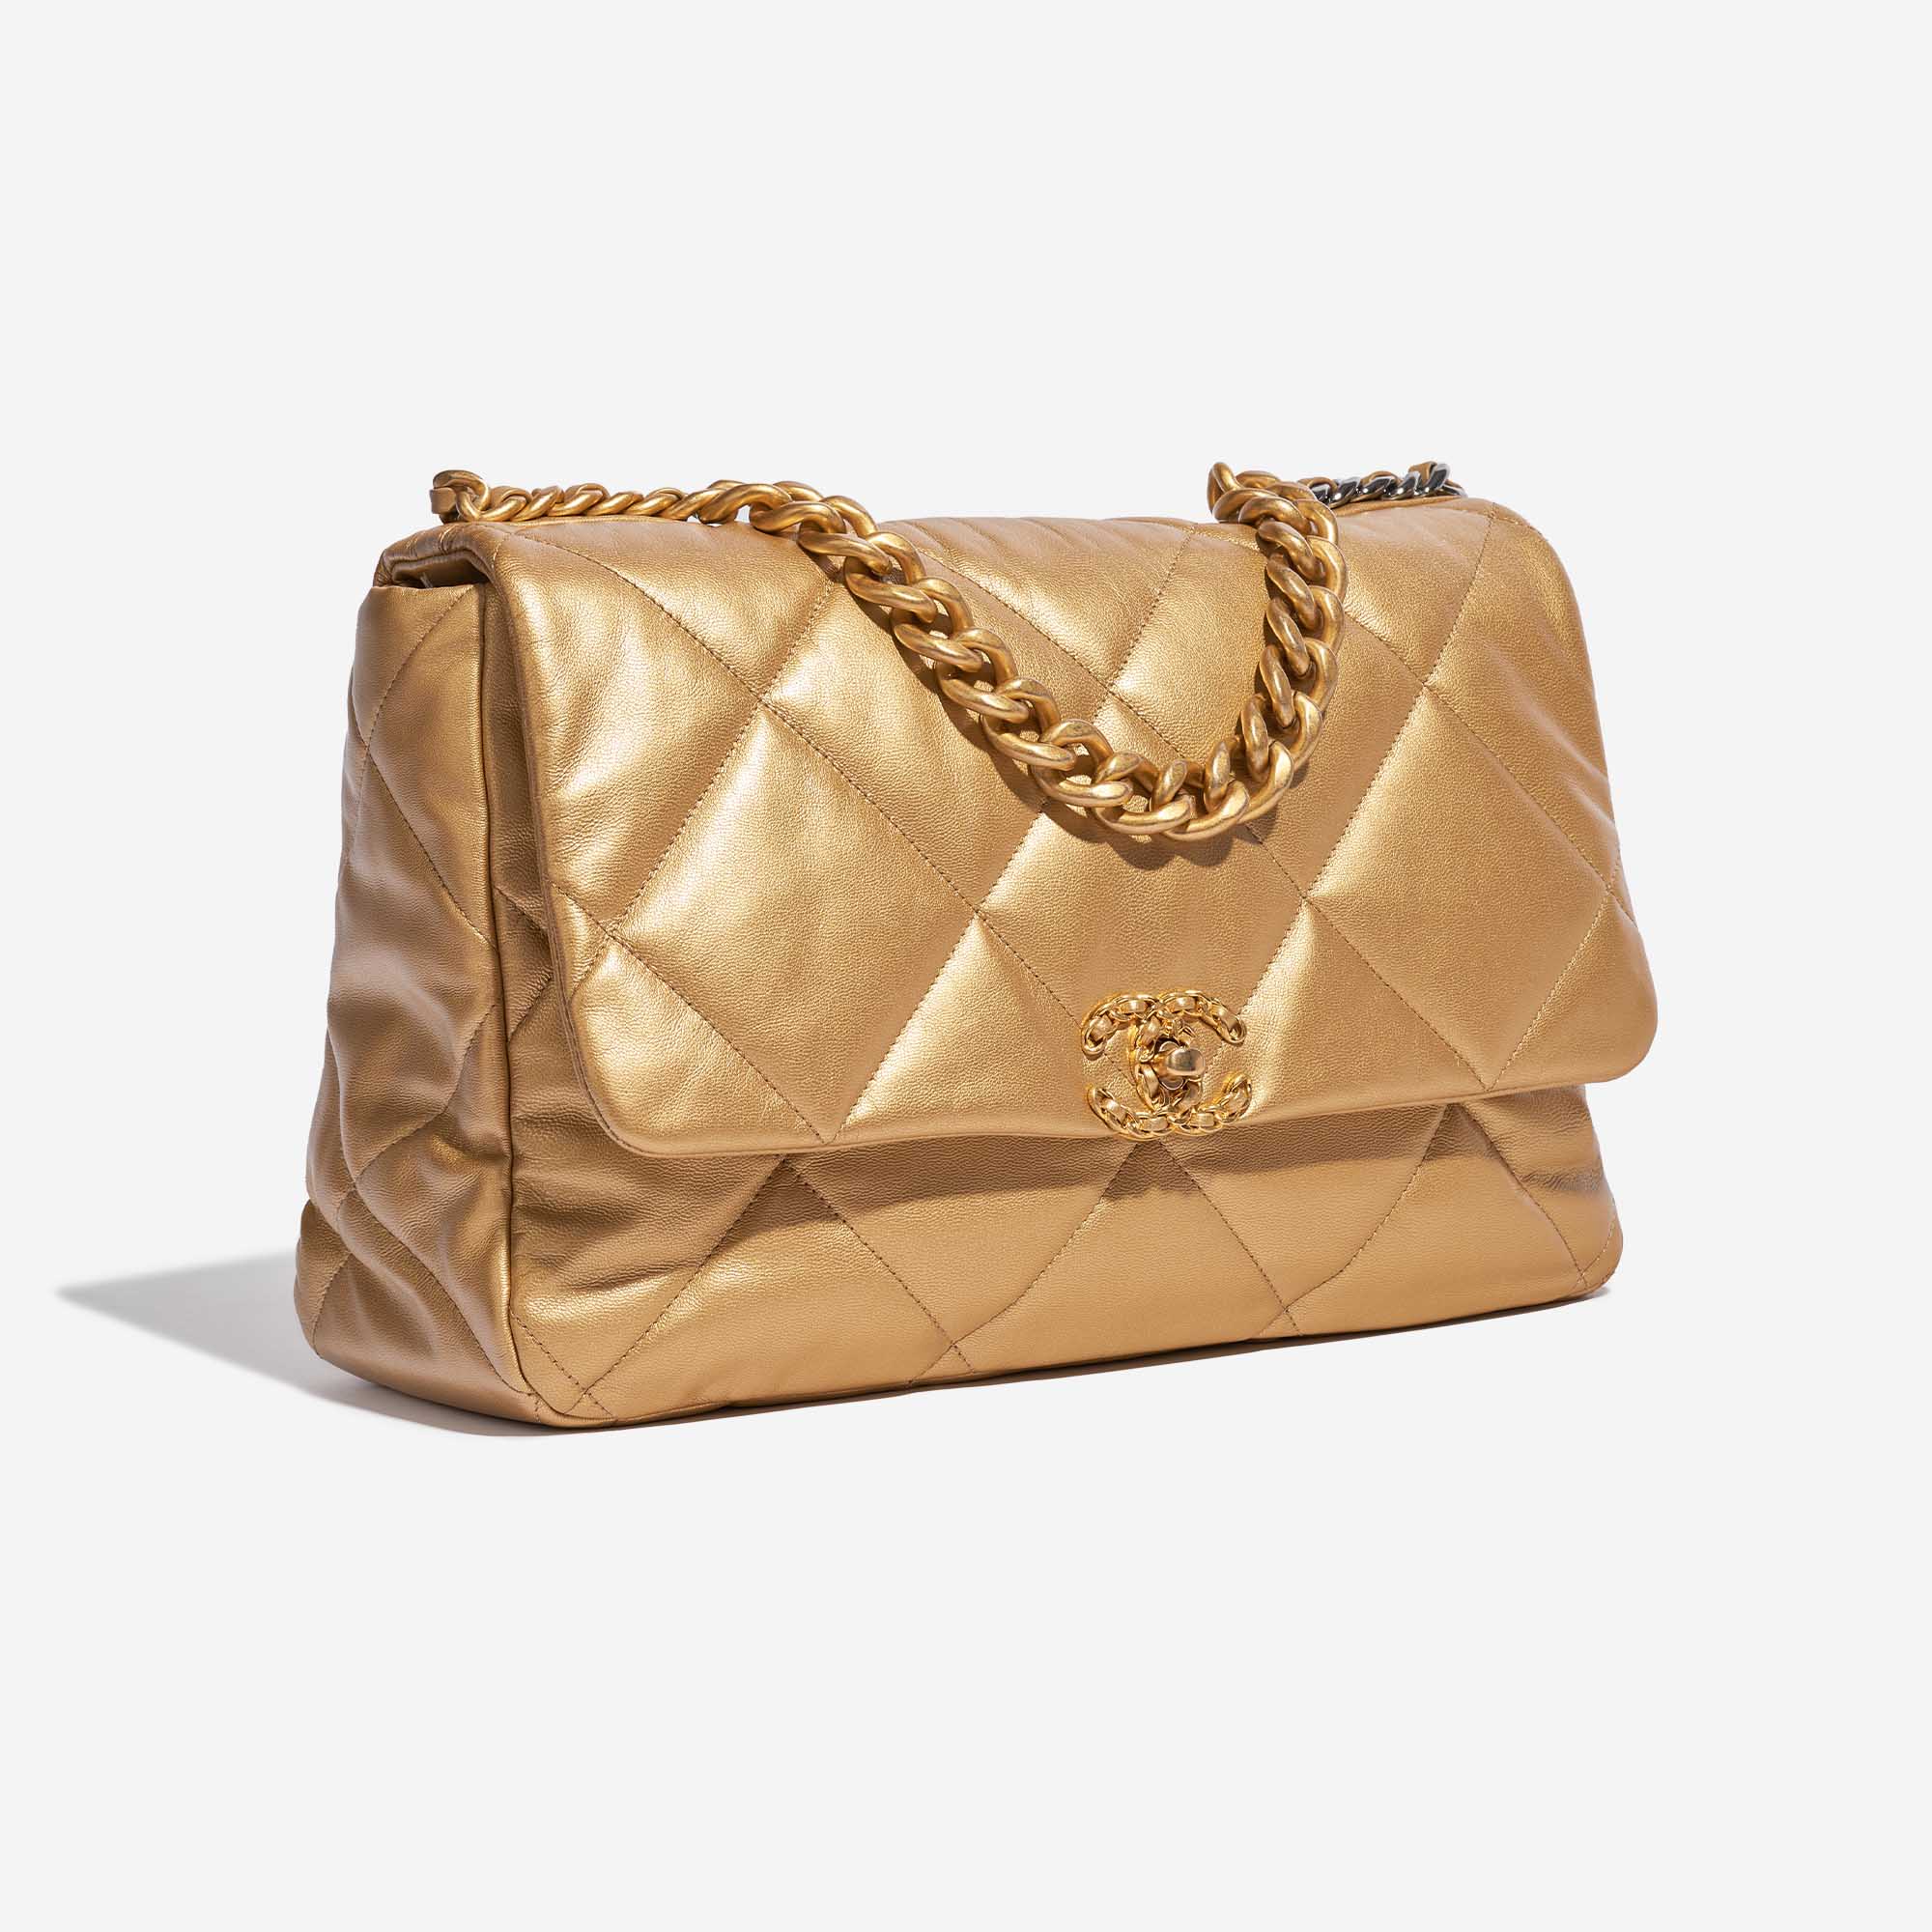 Pre-owned Chanel bag 19 Flap Bag Maxi Lamb Gold Gold Side Front | Sell your designer bag on Saclab.com